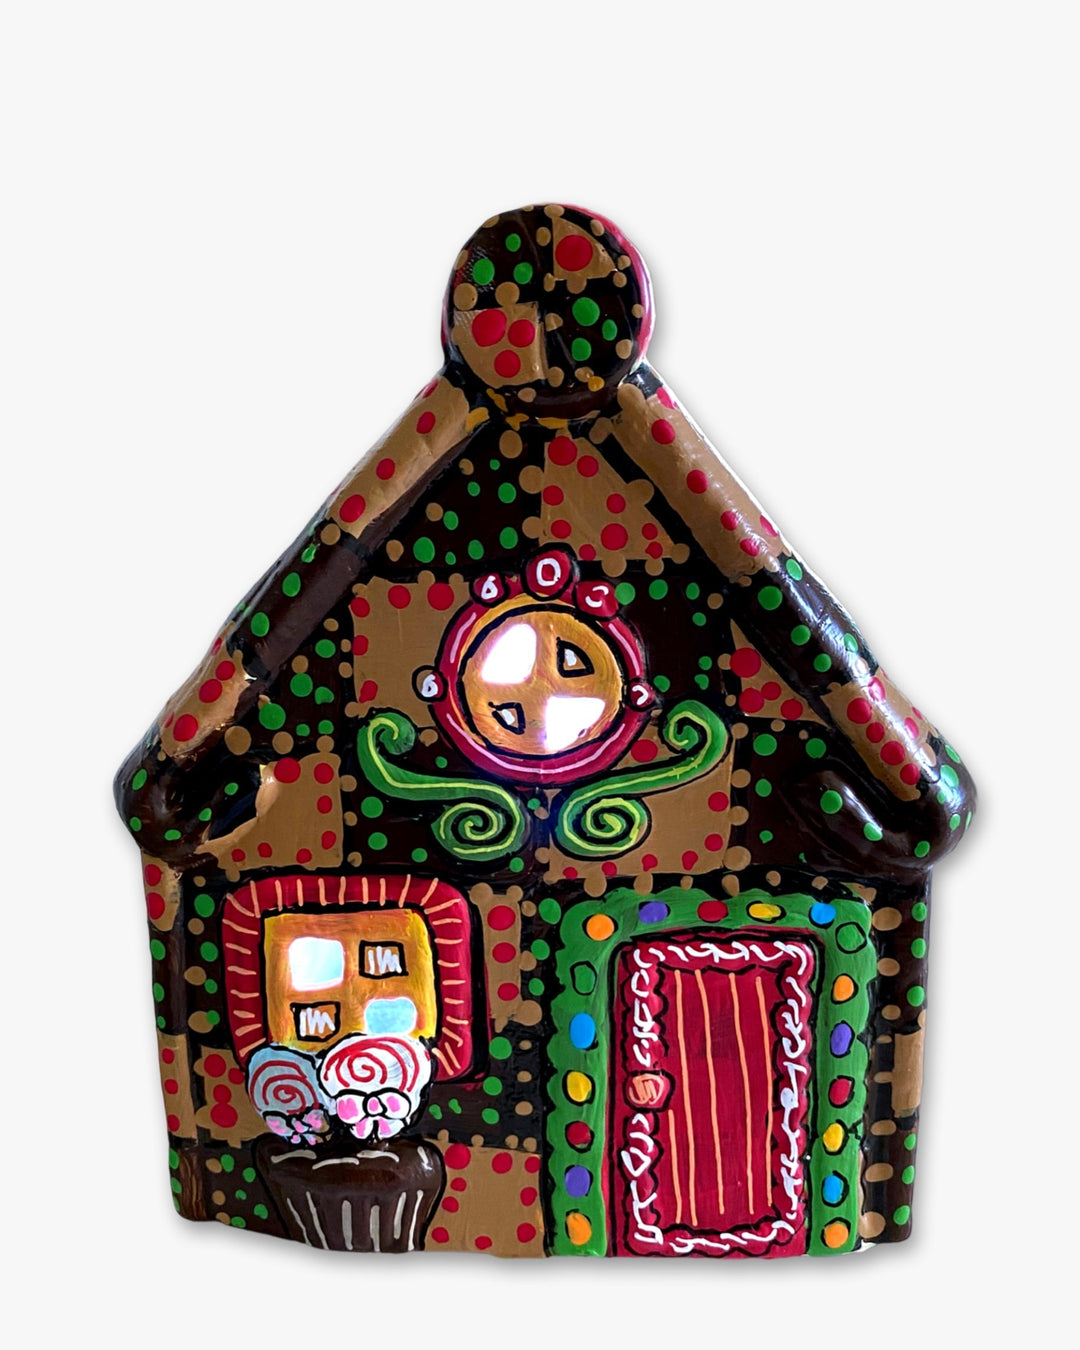 The Gingerbread House Brown & Sand Hand Painted Ceramic LED Christmas Village House - Heather Freitas 